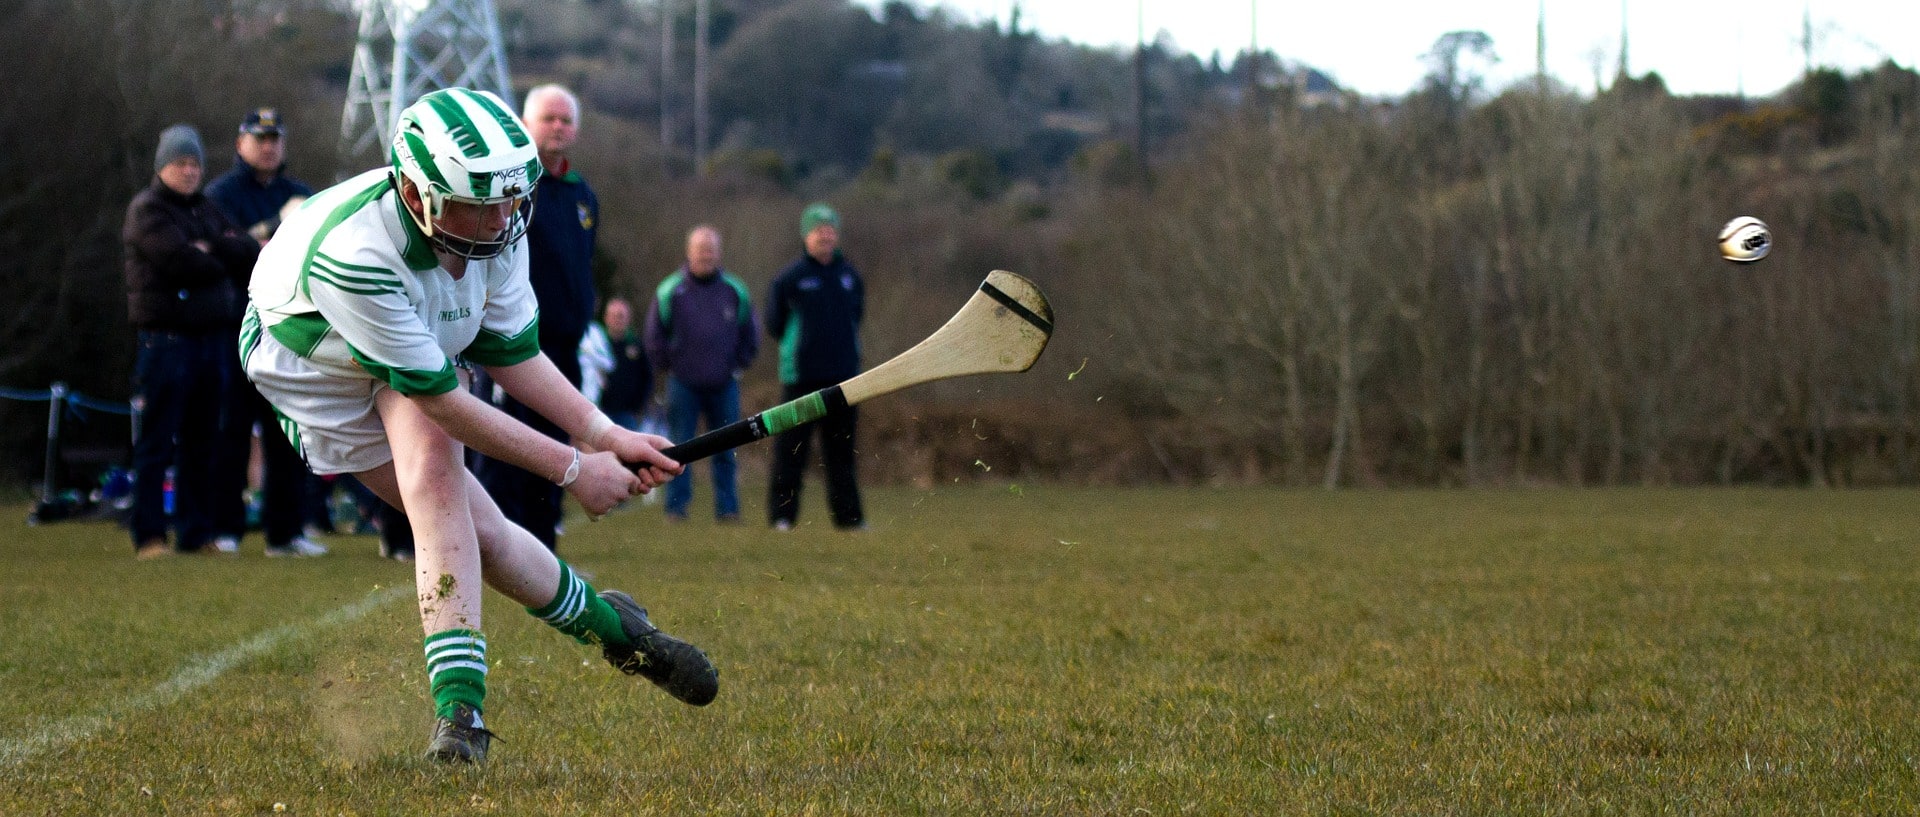 Learning about hurling is an awesome thing to do in Kilkenny Ireland